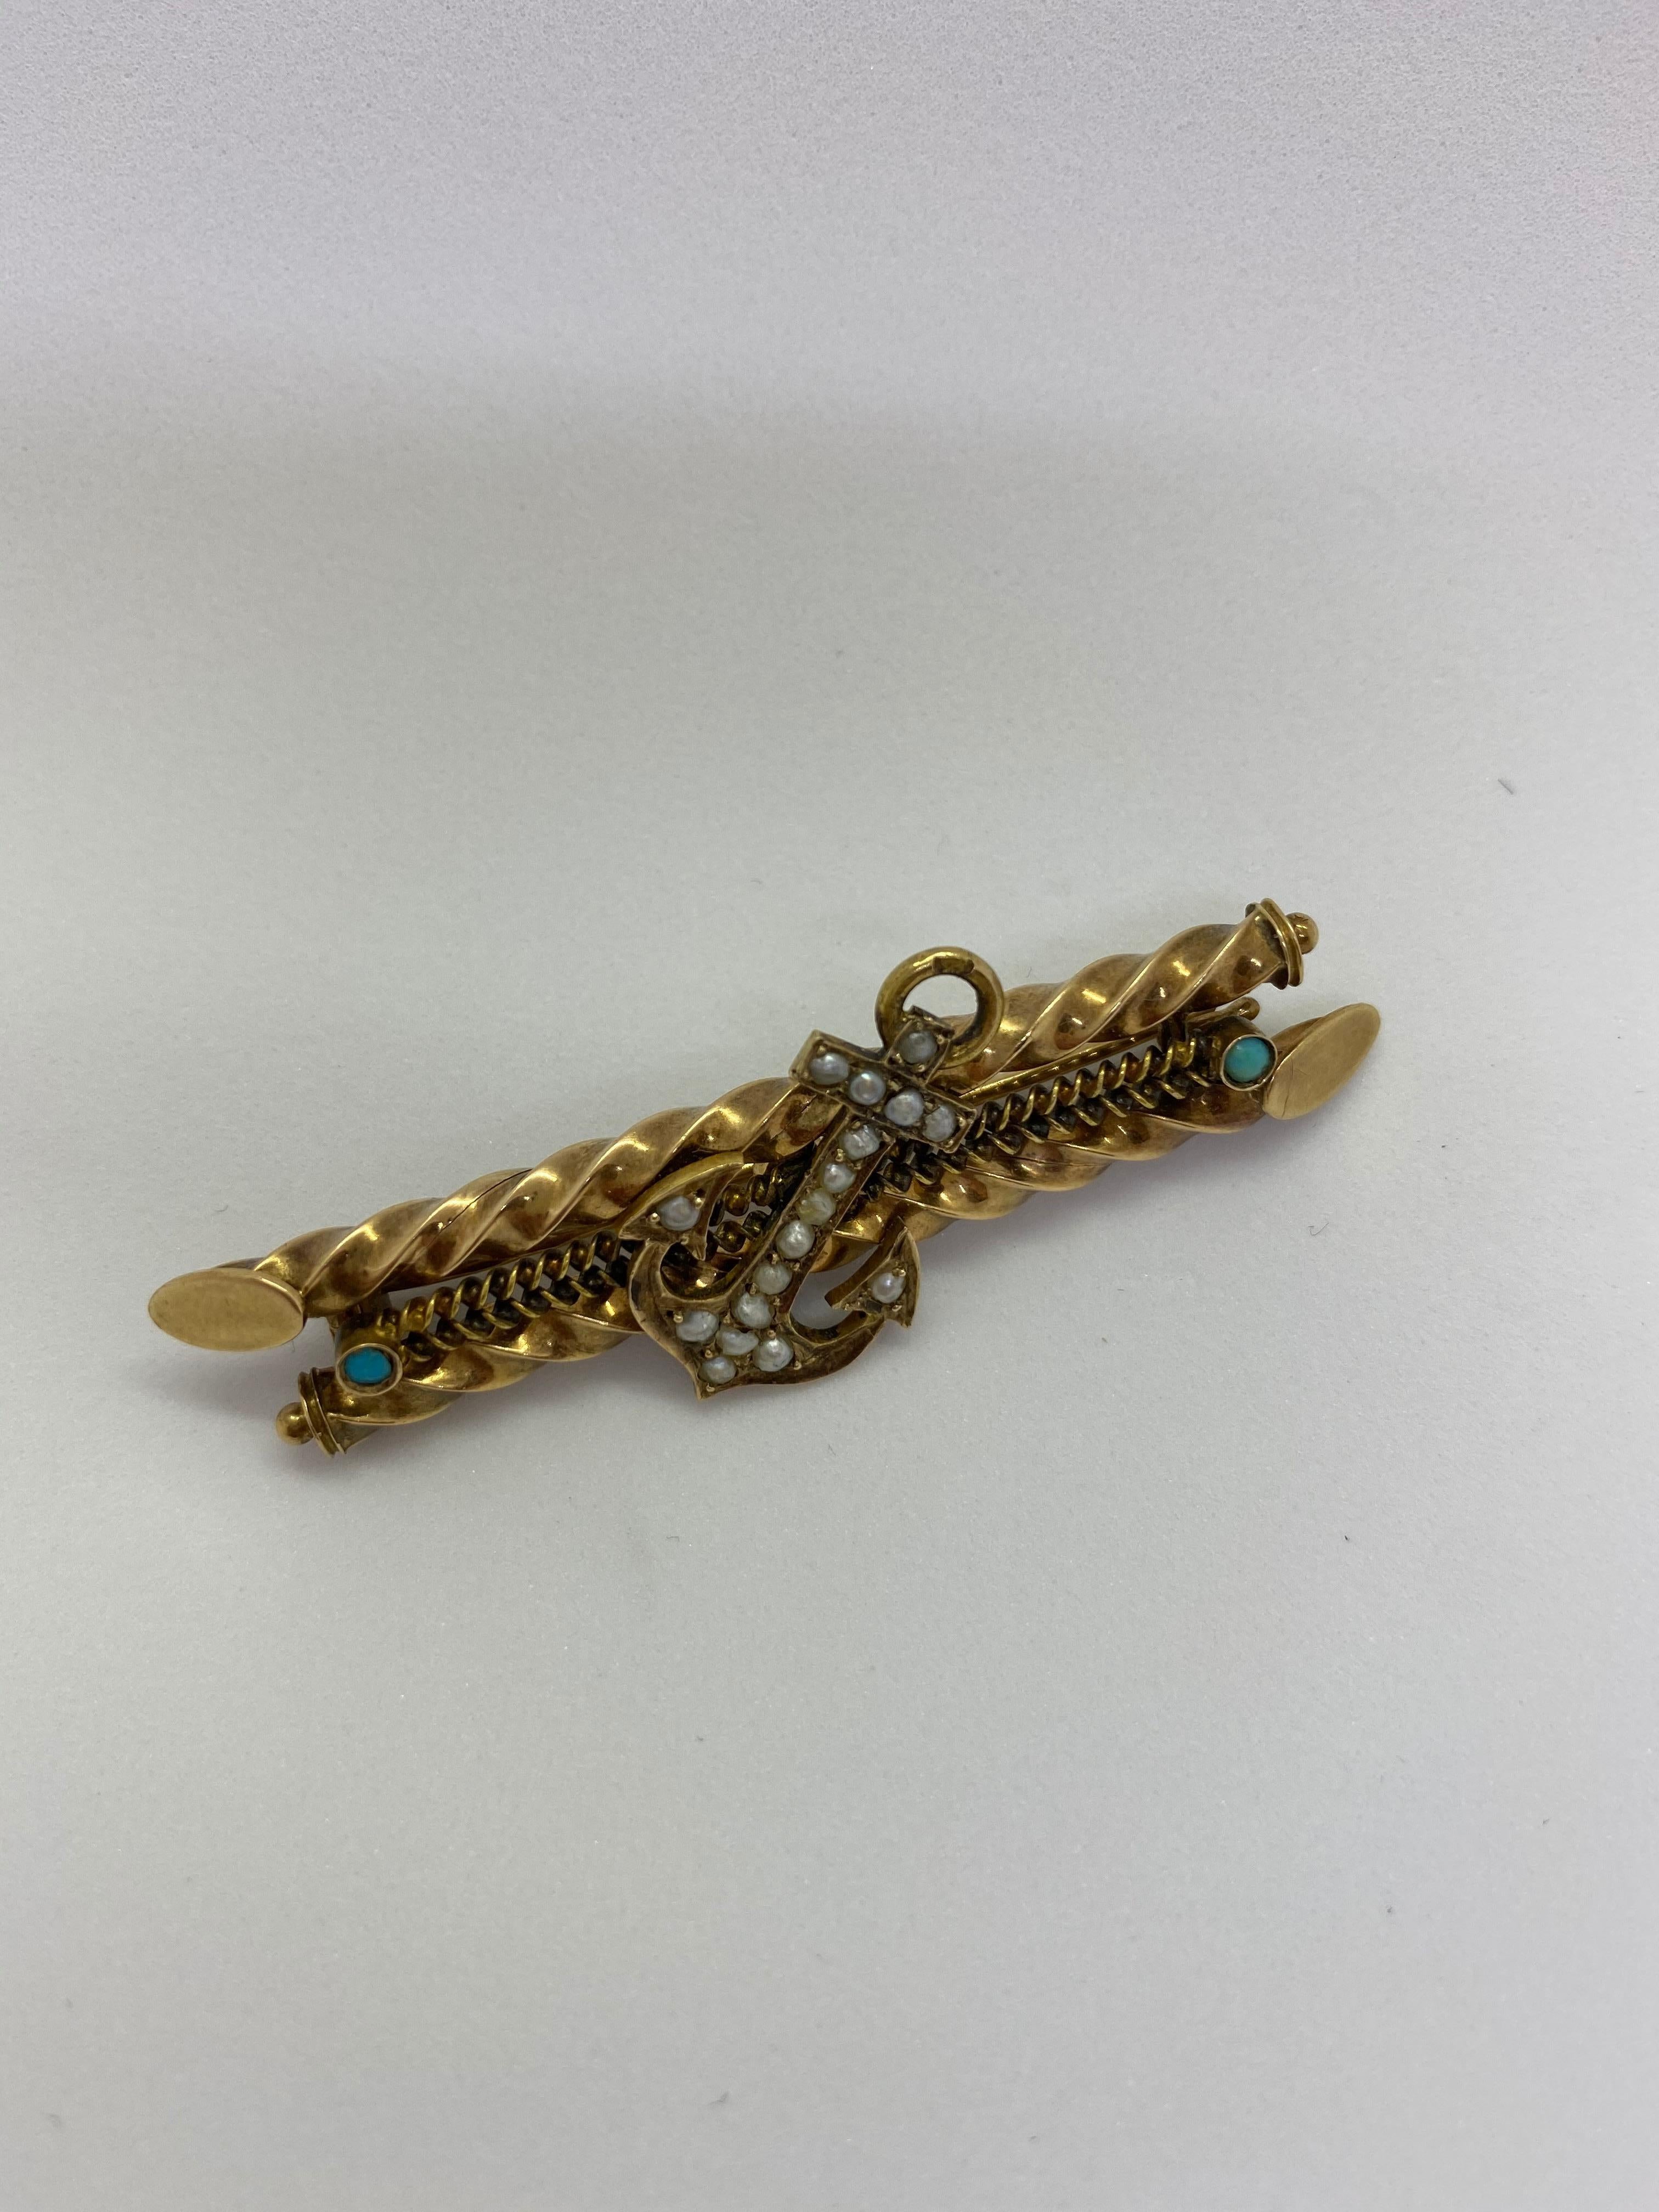 14 Carat Yellow Gold Russia Pearl Turquoise Anchor Barette Brooch
14k, Russia gold stamp 56
Pearls and turquoise
Made in Russia before 1917